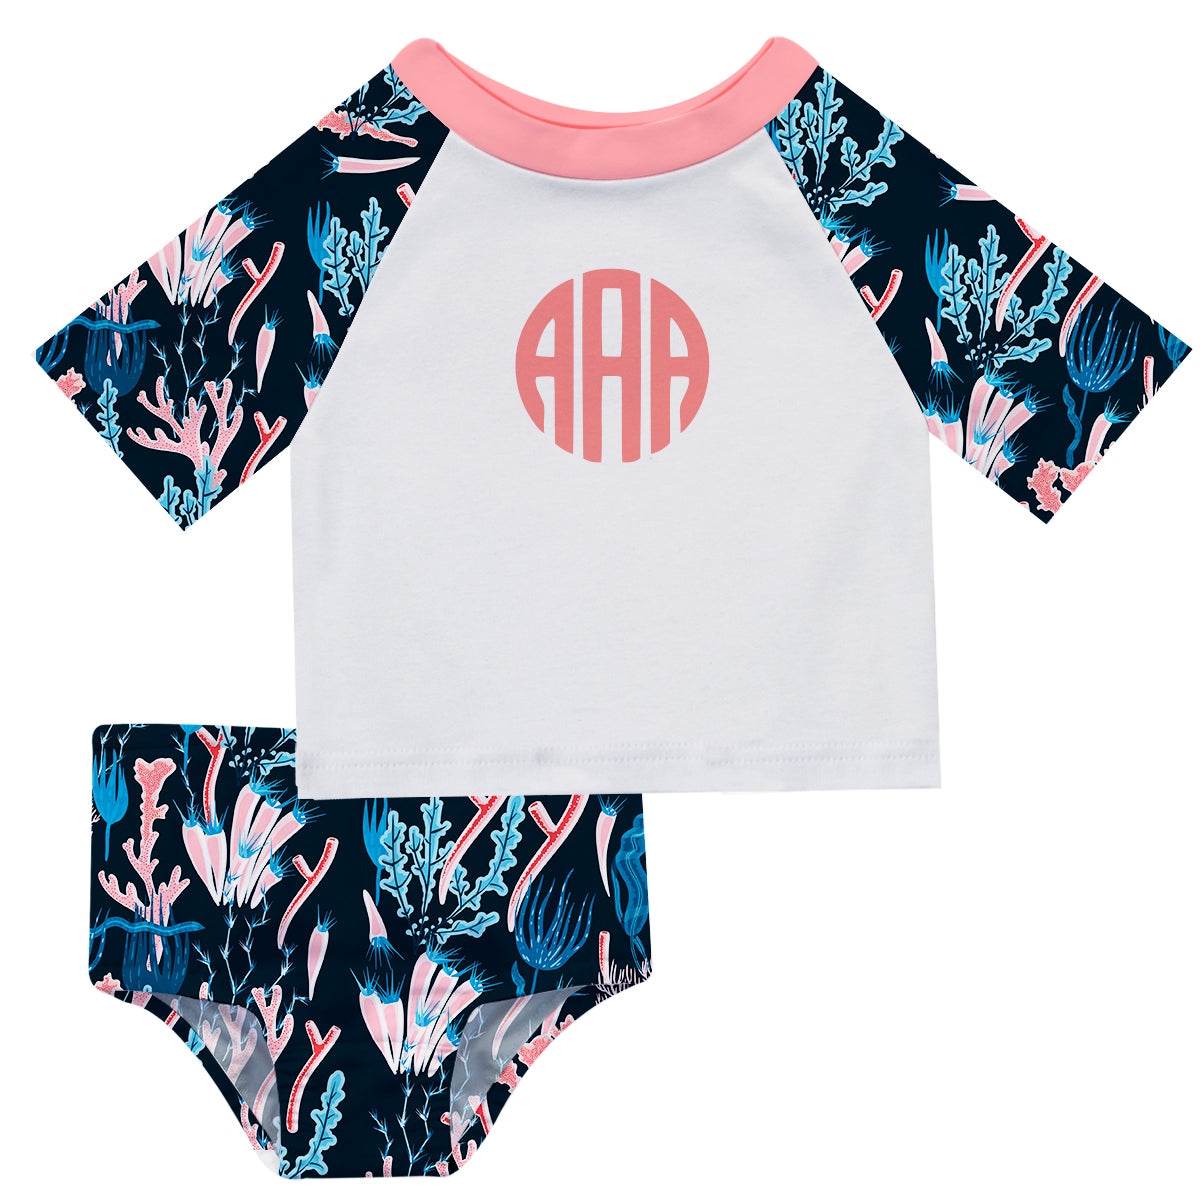 Coral Print Monogram White and Navy 2pc Short Sleeve Rash Guard - Wimziy&Co.